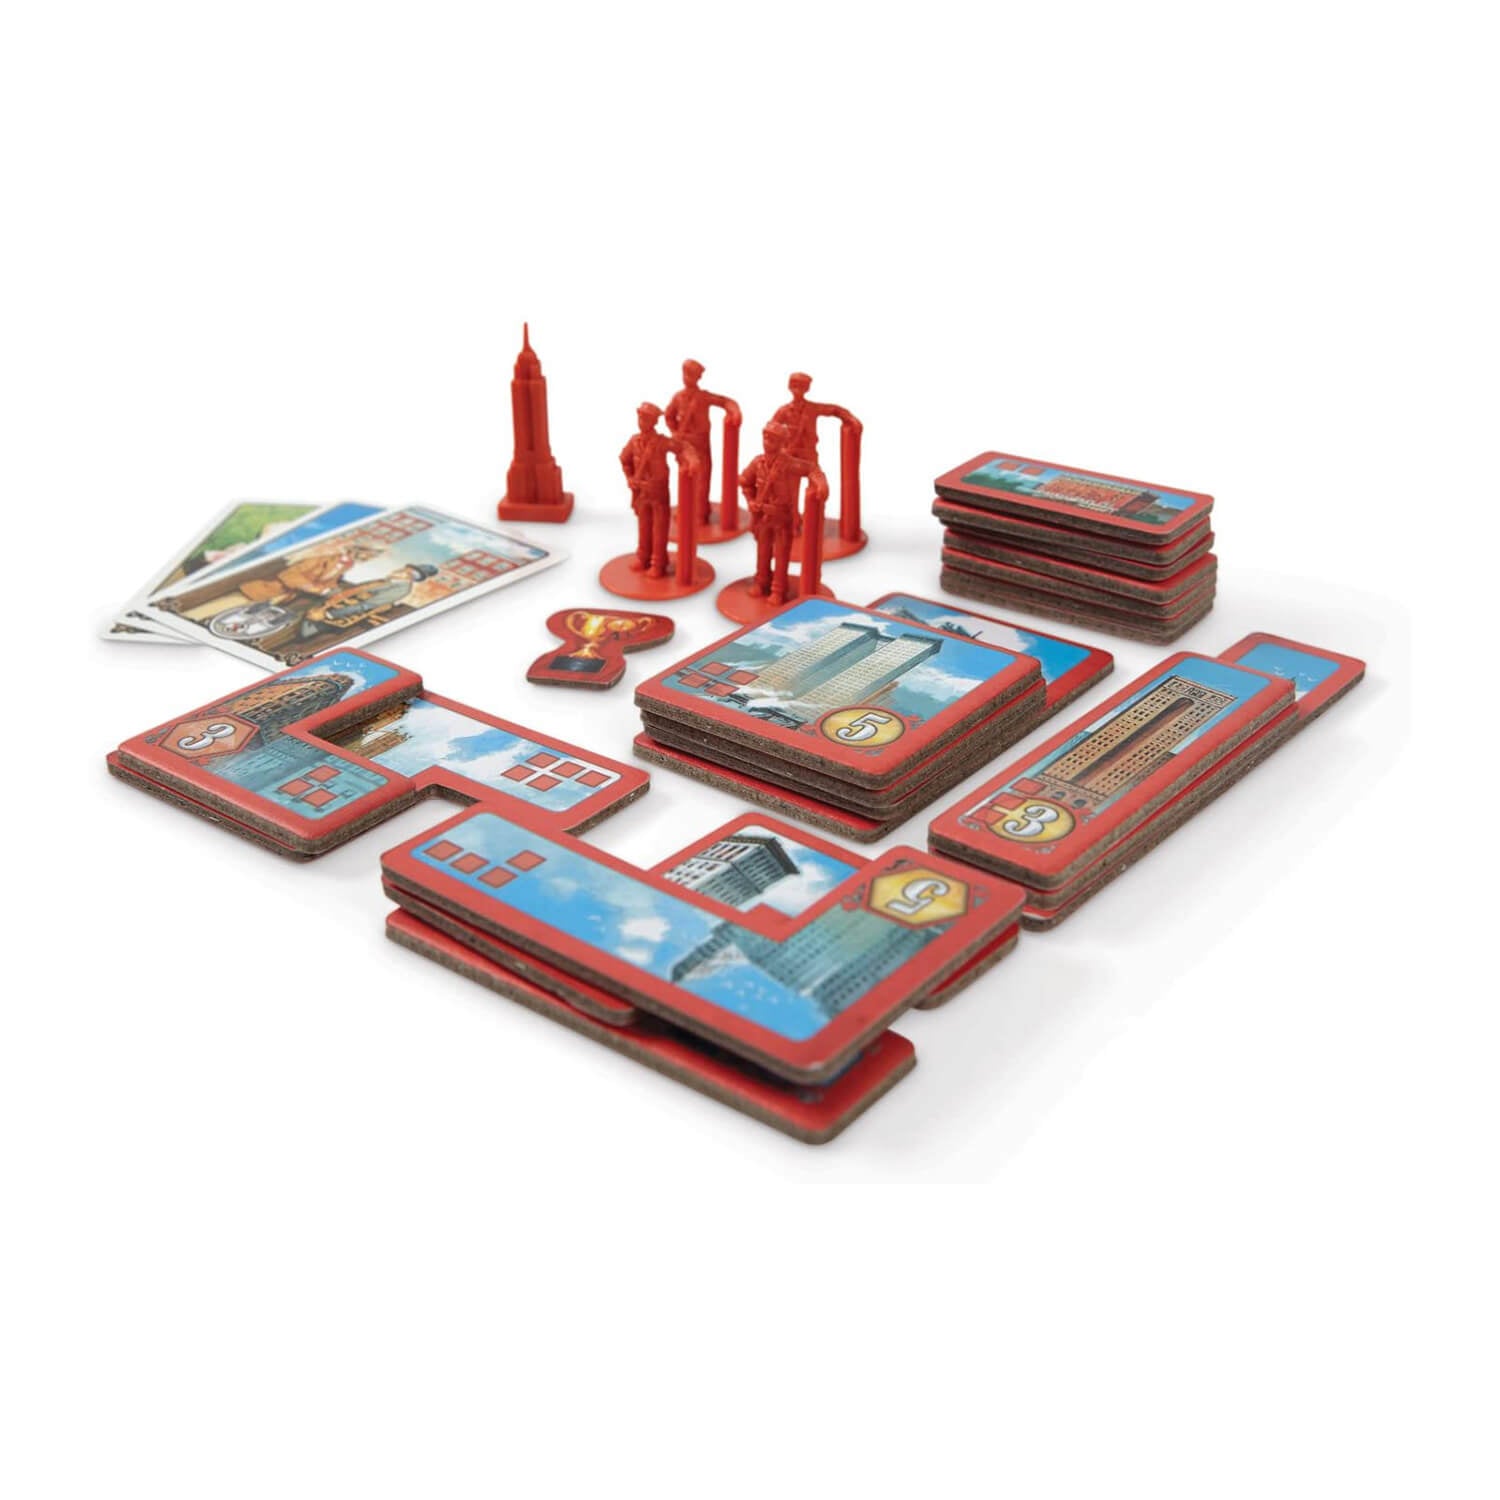 Second view of cards and pieces included in the game.